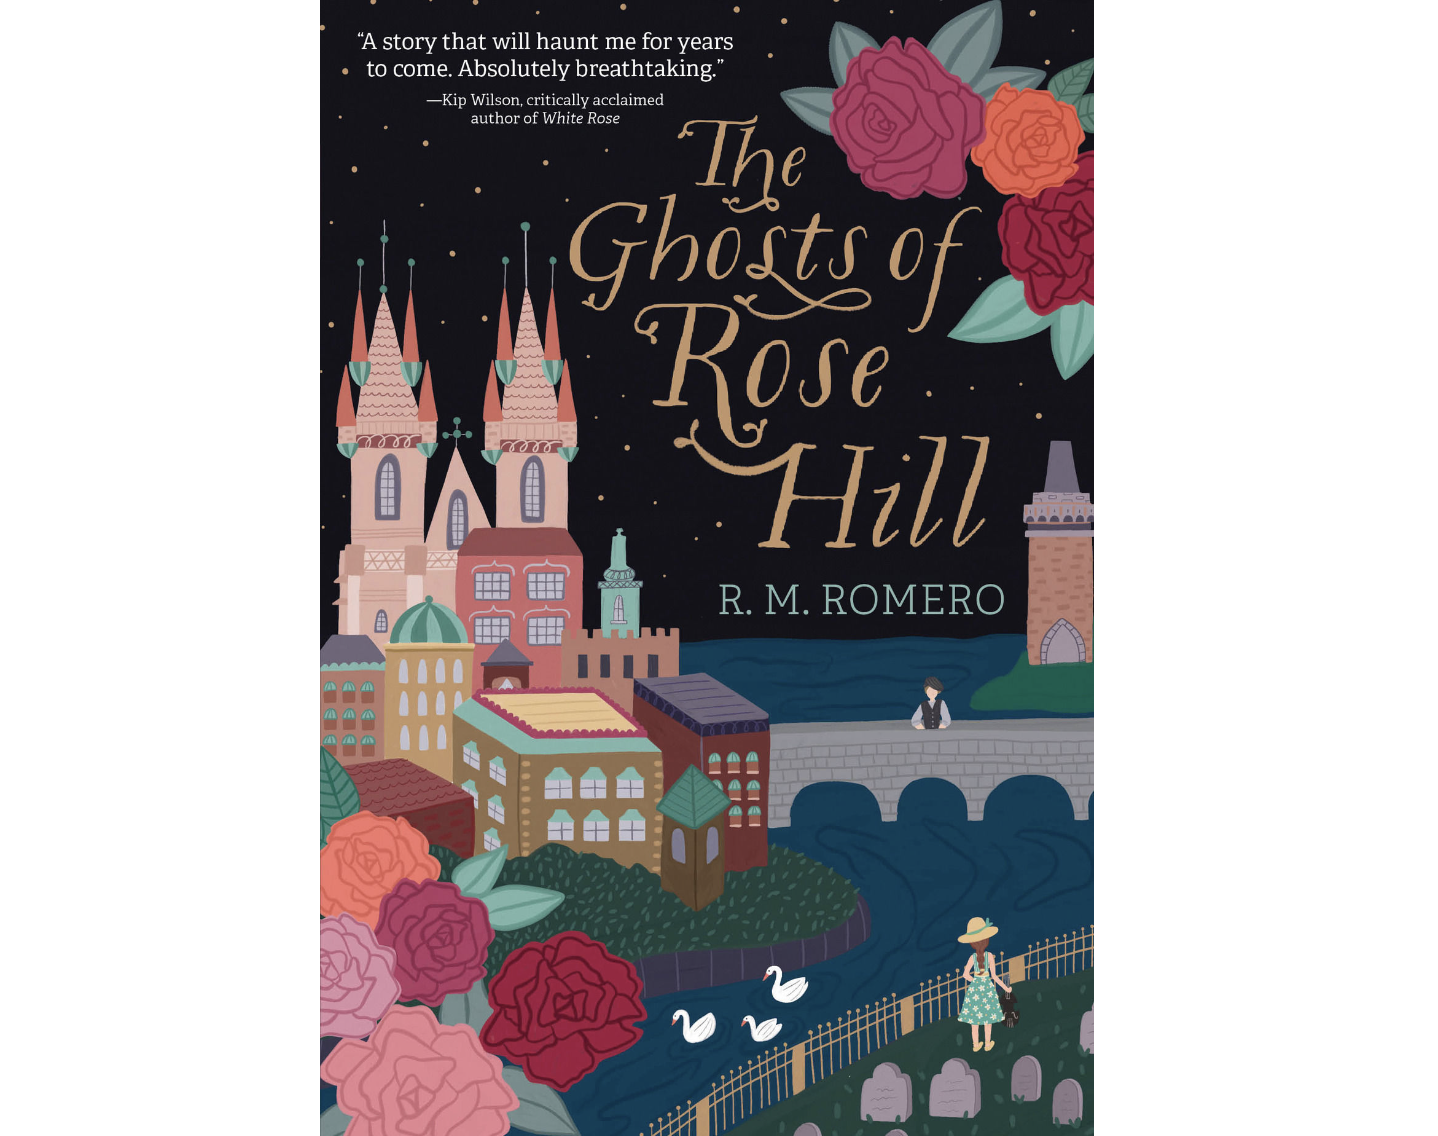 'The Ghosts of Rose Hill' by RM Romero